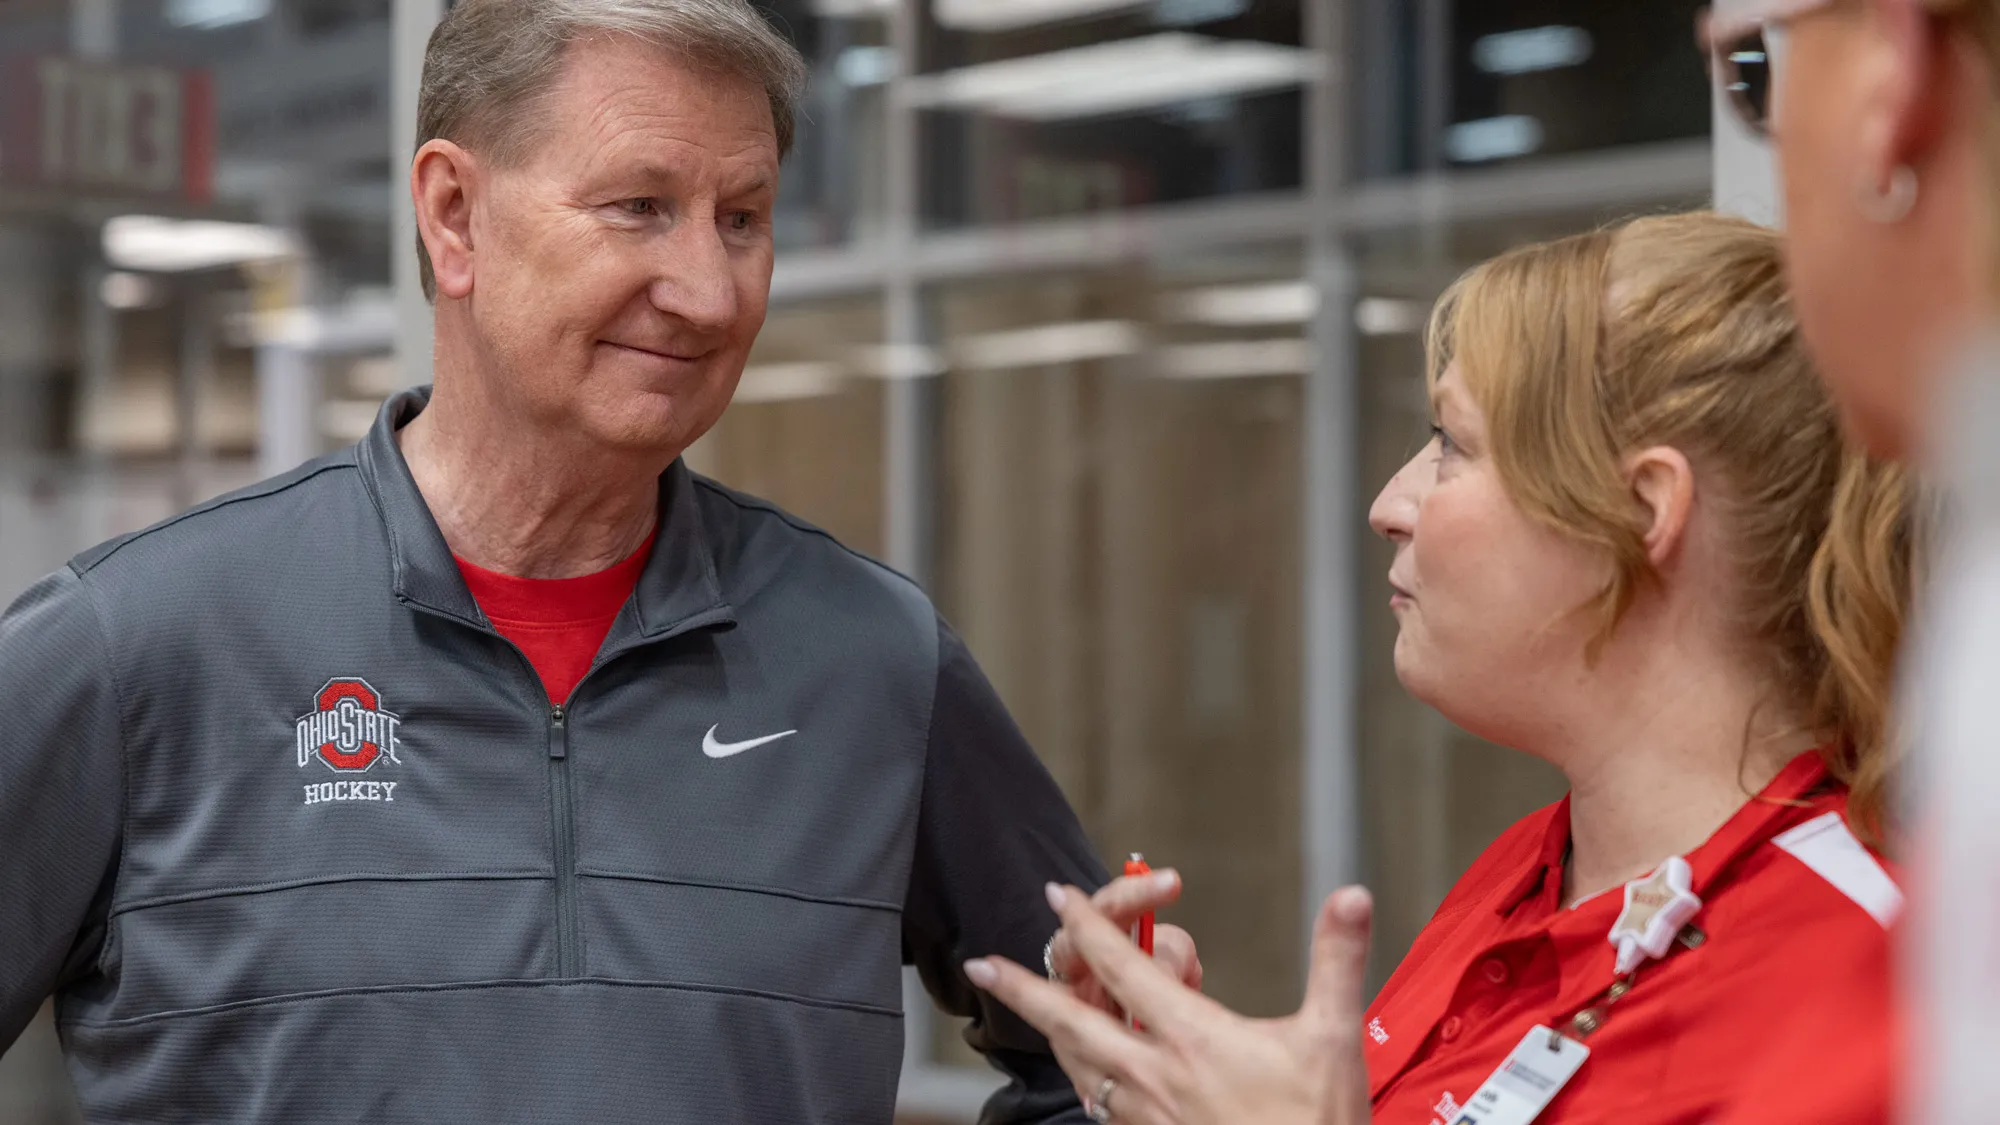 Ohio State President Walter “Ted” Carter Jr. listens intently to a university staff member. As she gestures and speaks, he meets her eyes and his expression shows his interest in what she is saying.